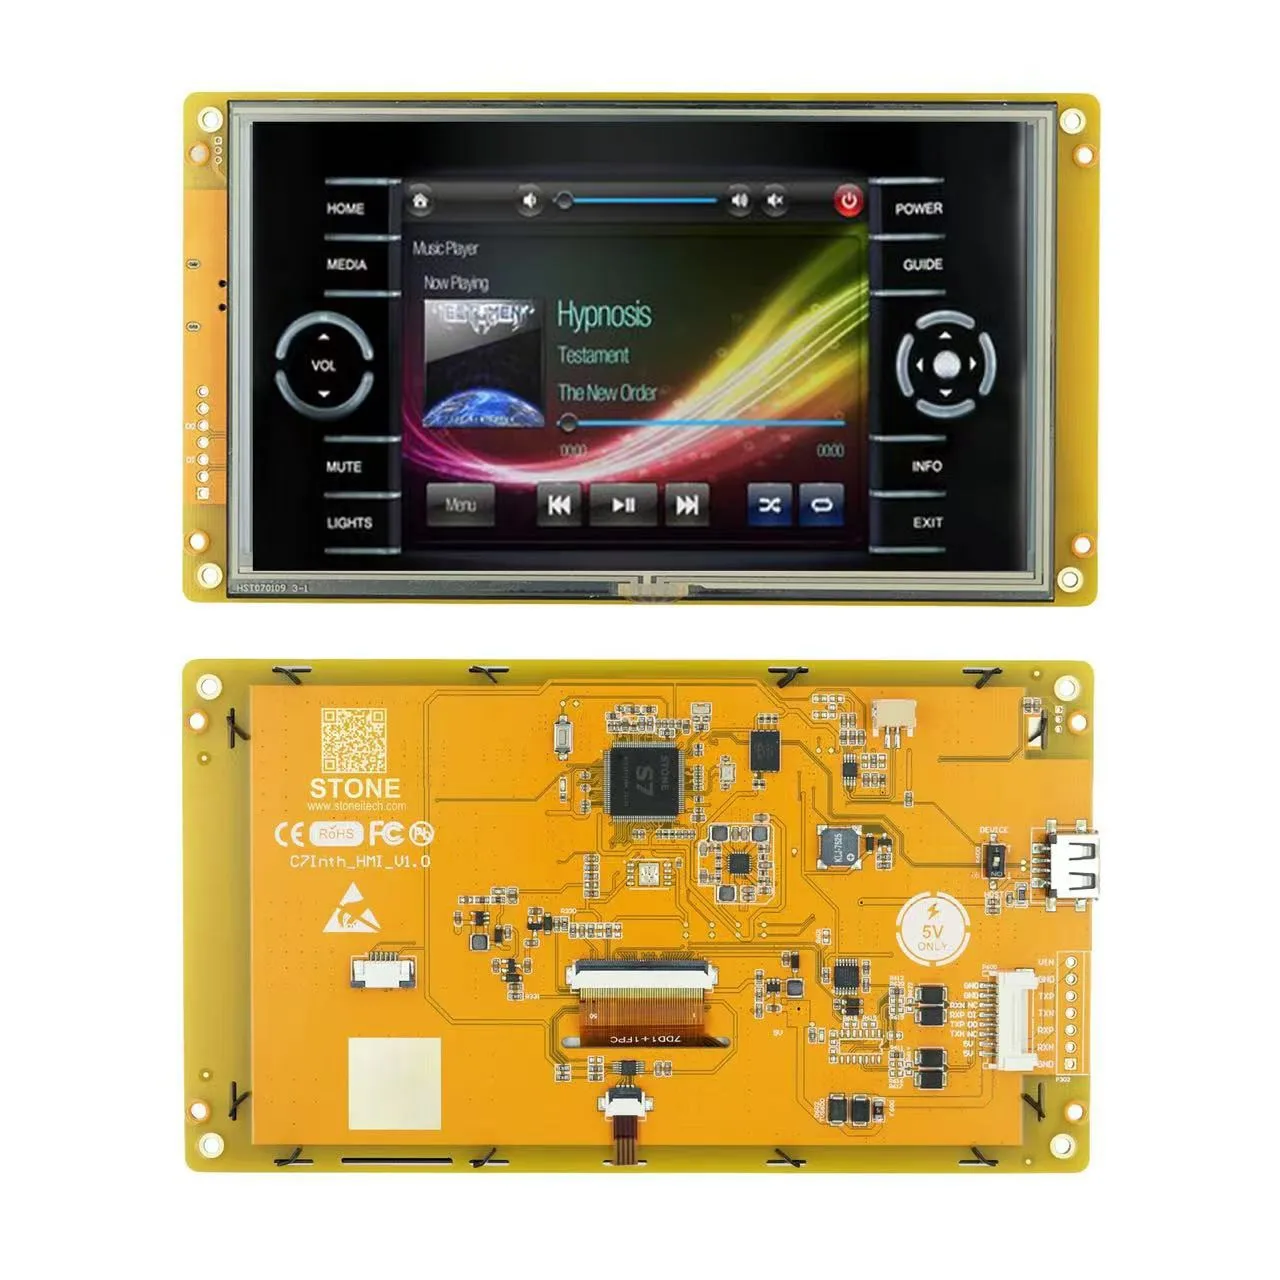 7.0 Inch Smart HMI New Launch Intelligent Series TFT LCD monitor controlled by any MCU 1 G Hz Cortex A8 CPU driving device